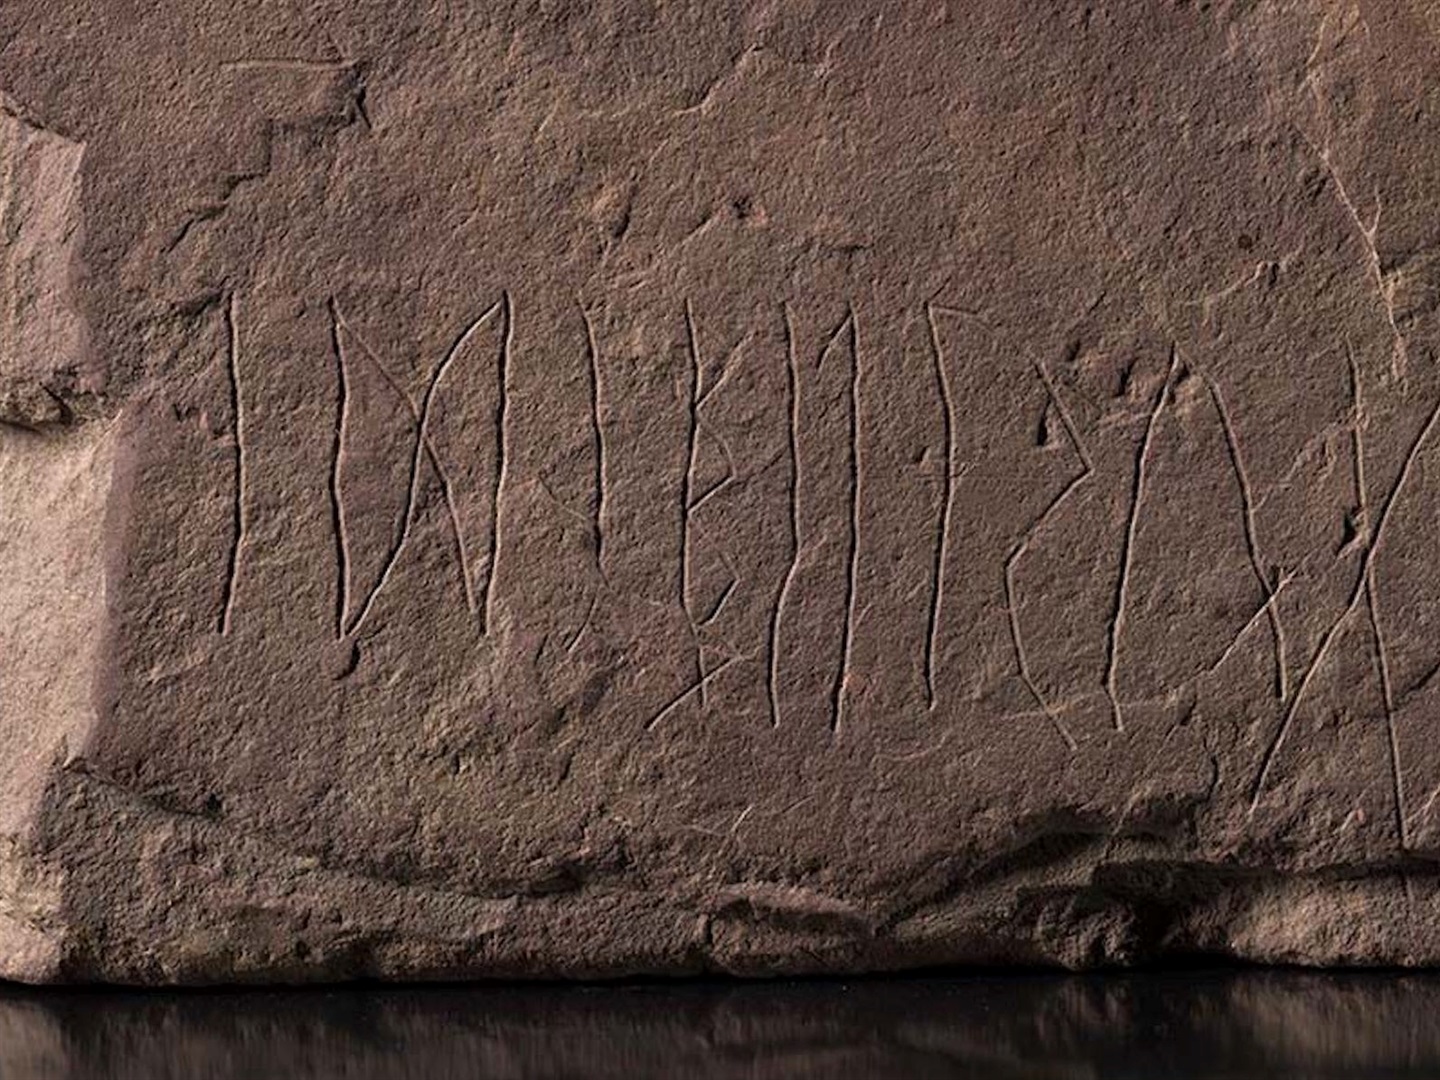 Businessinsider.co.za | A 2,000-year-old rune stone found in Norway could be the oldest ever, and give a glimpse into ancient writing systems